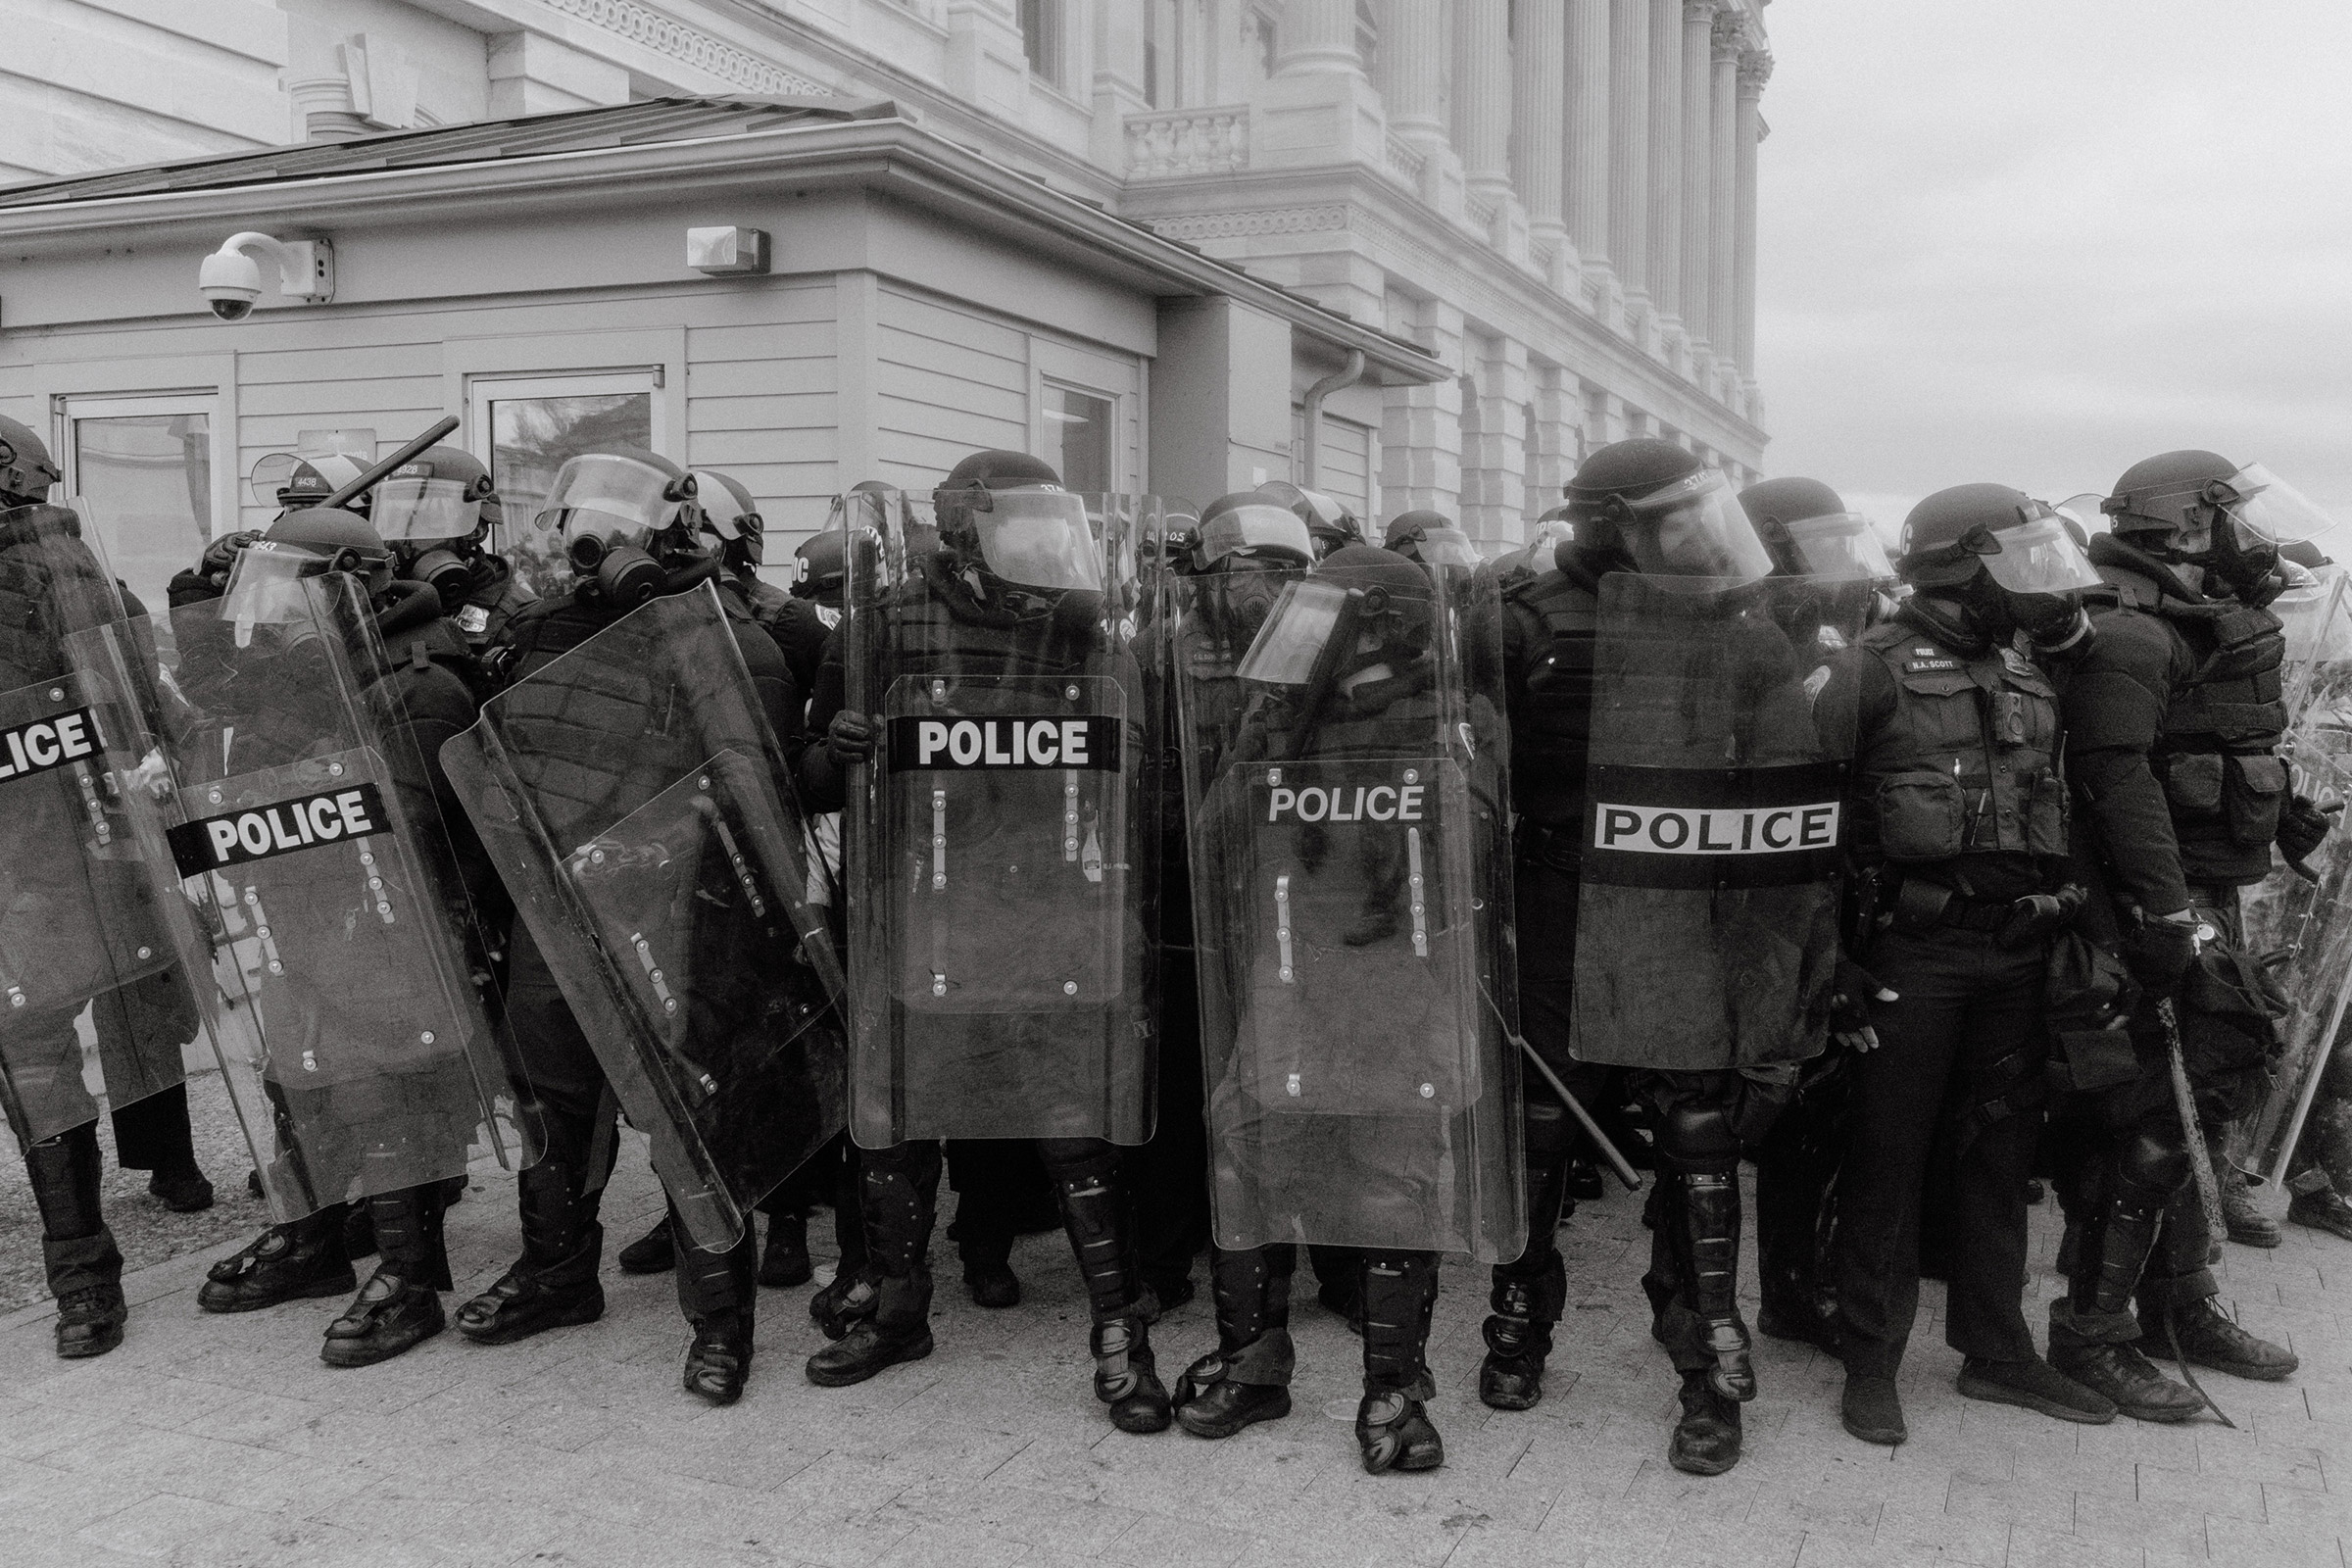 U.S. Capitol Police outside of the Capitol Building in Washington on Jan. 6, 2021. (Christopher Lee for TIME)